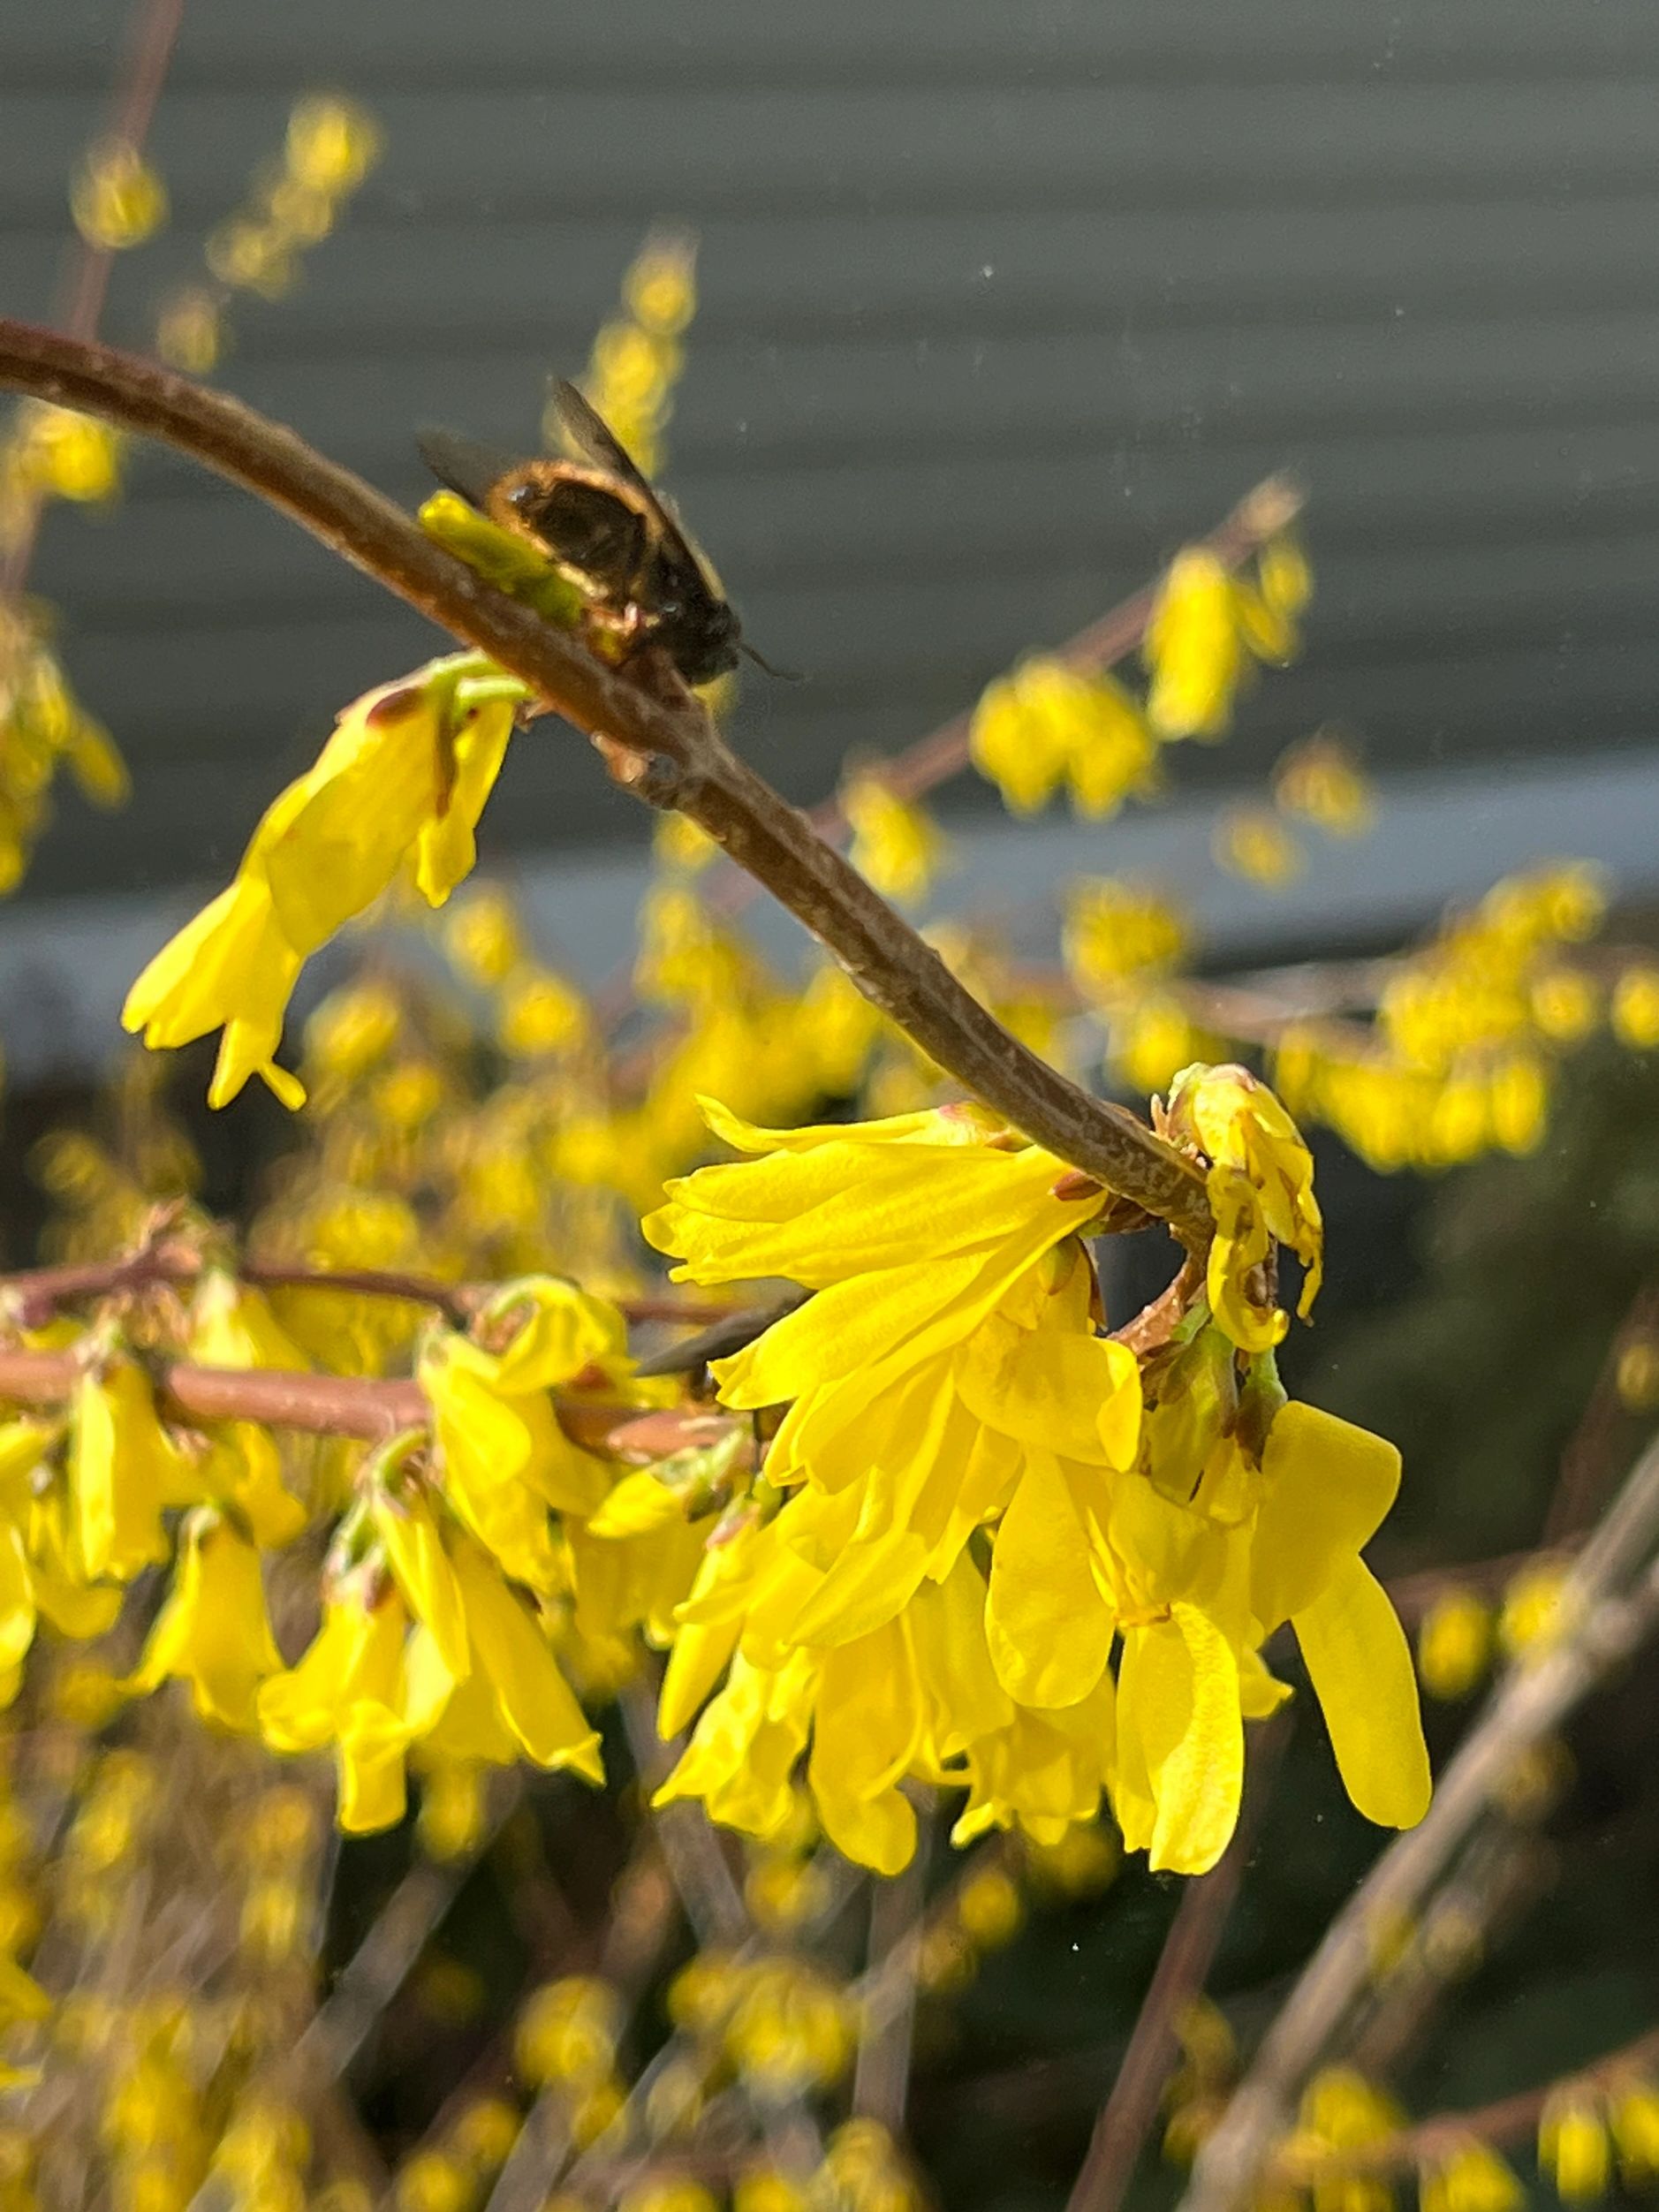 Our forsythia bloomed very early this year.… before March and before our last snow which followed th